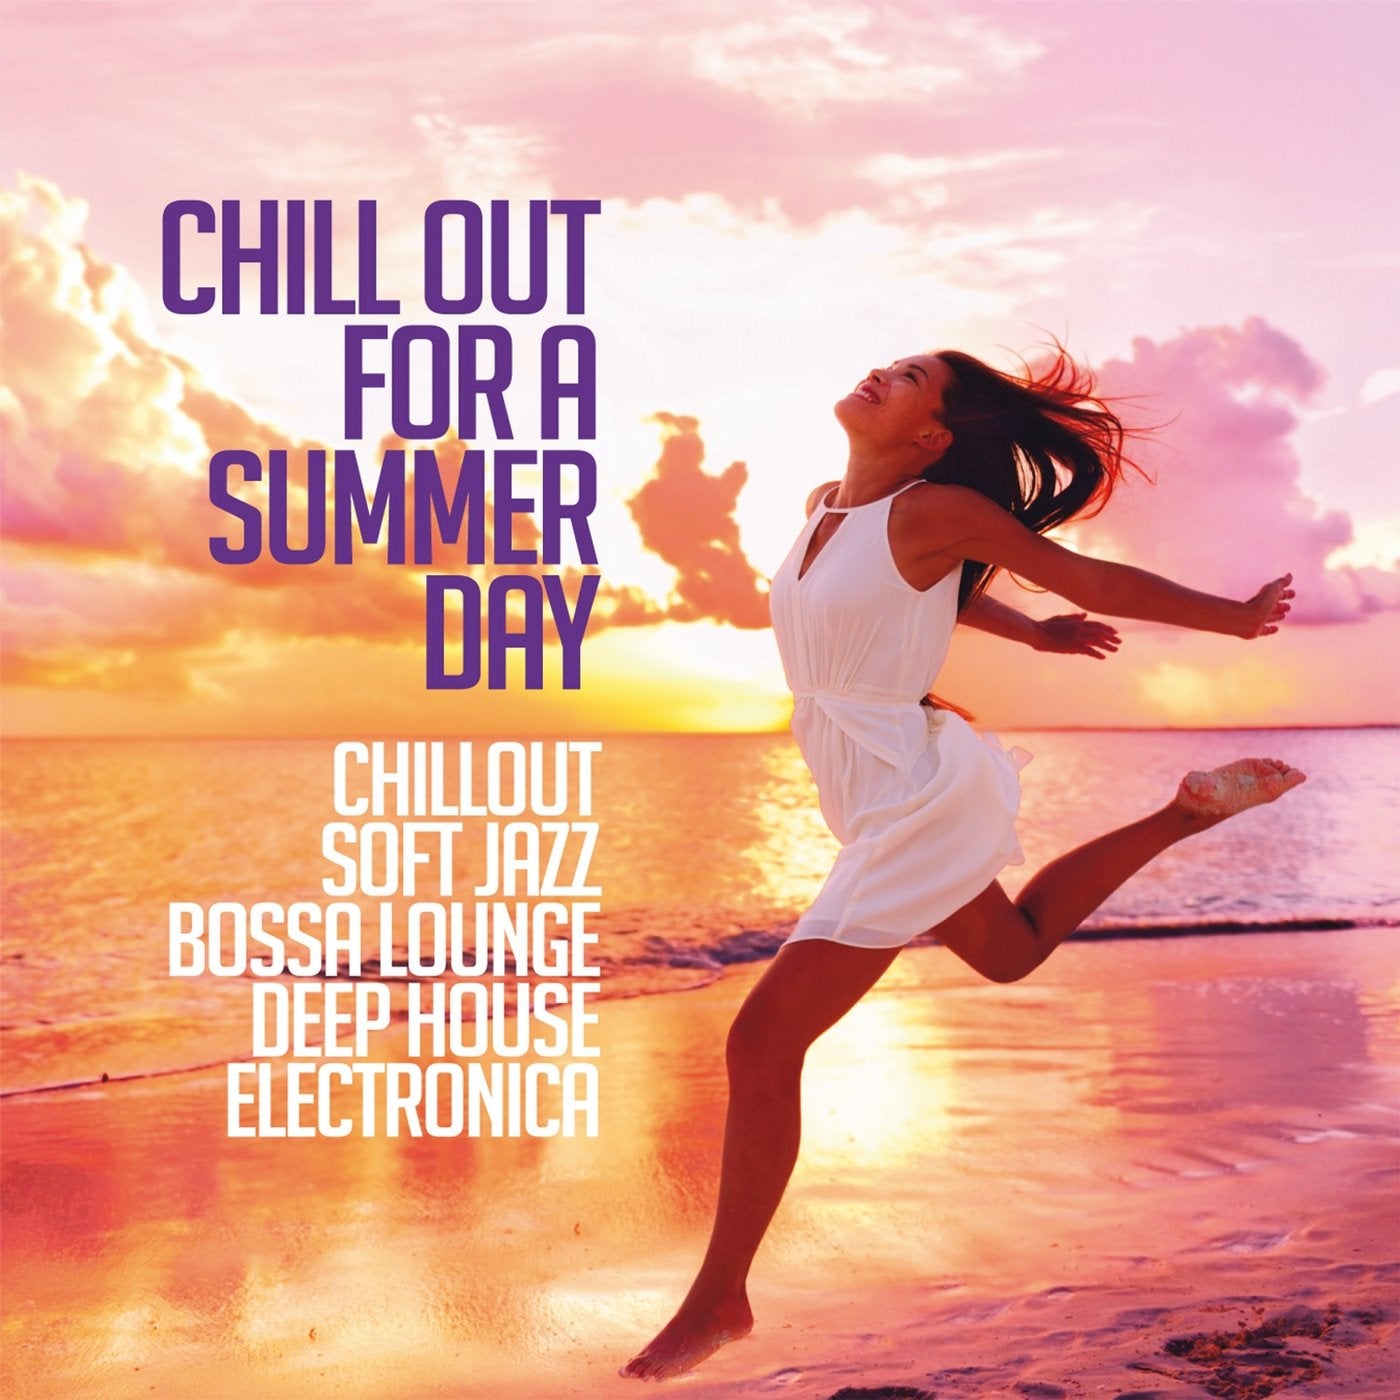 Chill Out for a Summer Day (Chillout, Soft Jazz, Bossa Lounge, Deep House & Electronica)